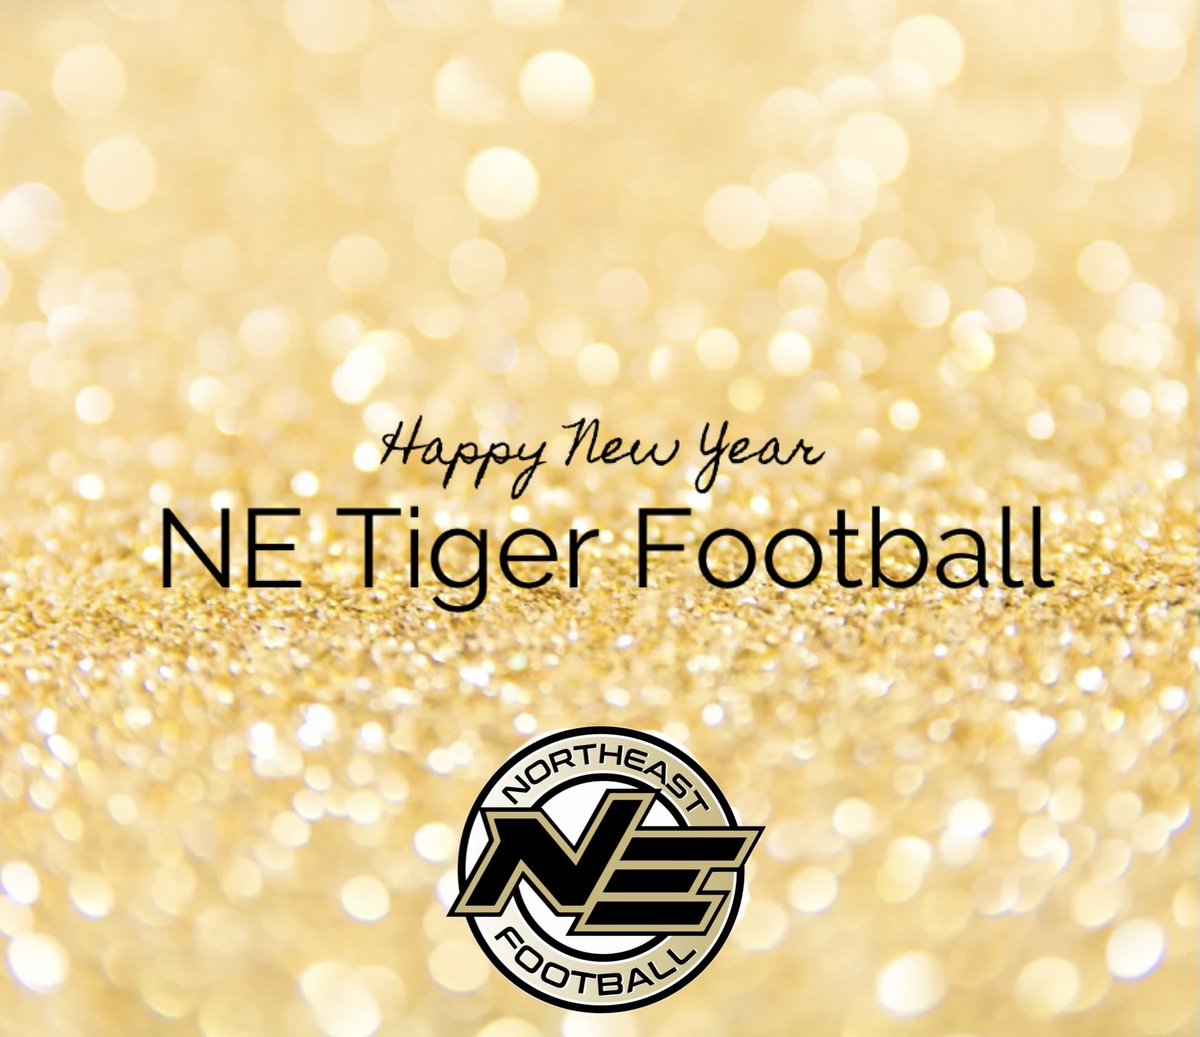 Happy New Year! Hope your new blessing come true! To new beginnings! ⁦@coachcannon97⁩ ⁦@R_Trevathan⁩ ⁦@ColeRotenberry⁩ ⁦@CedShell⁩ ⁦@CoachCampbell37⁩ ⁦@QB_CoachColeman⁩ ⁦⁦@NEMCCTigers⁩ ⁦⁦@CantBeBlocked25⁩ @DegarrickSamuel⁩